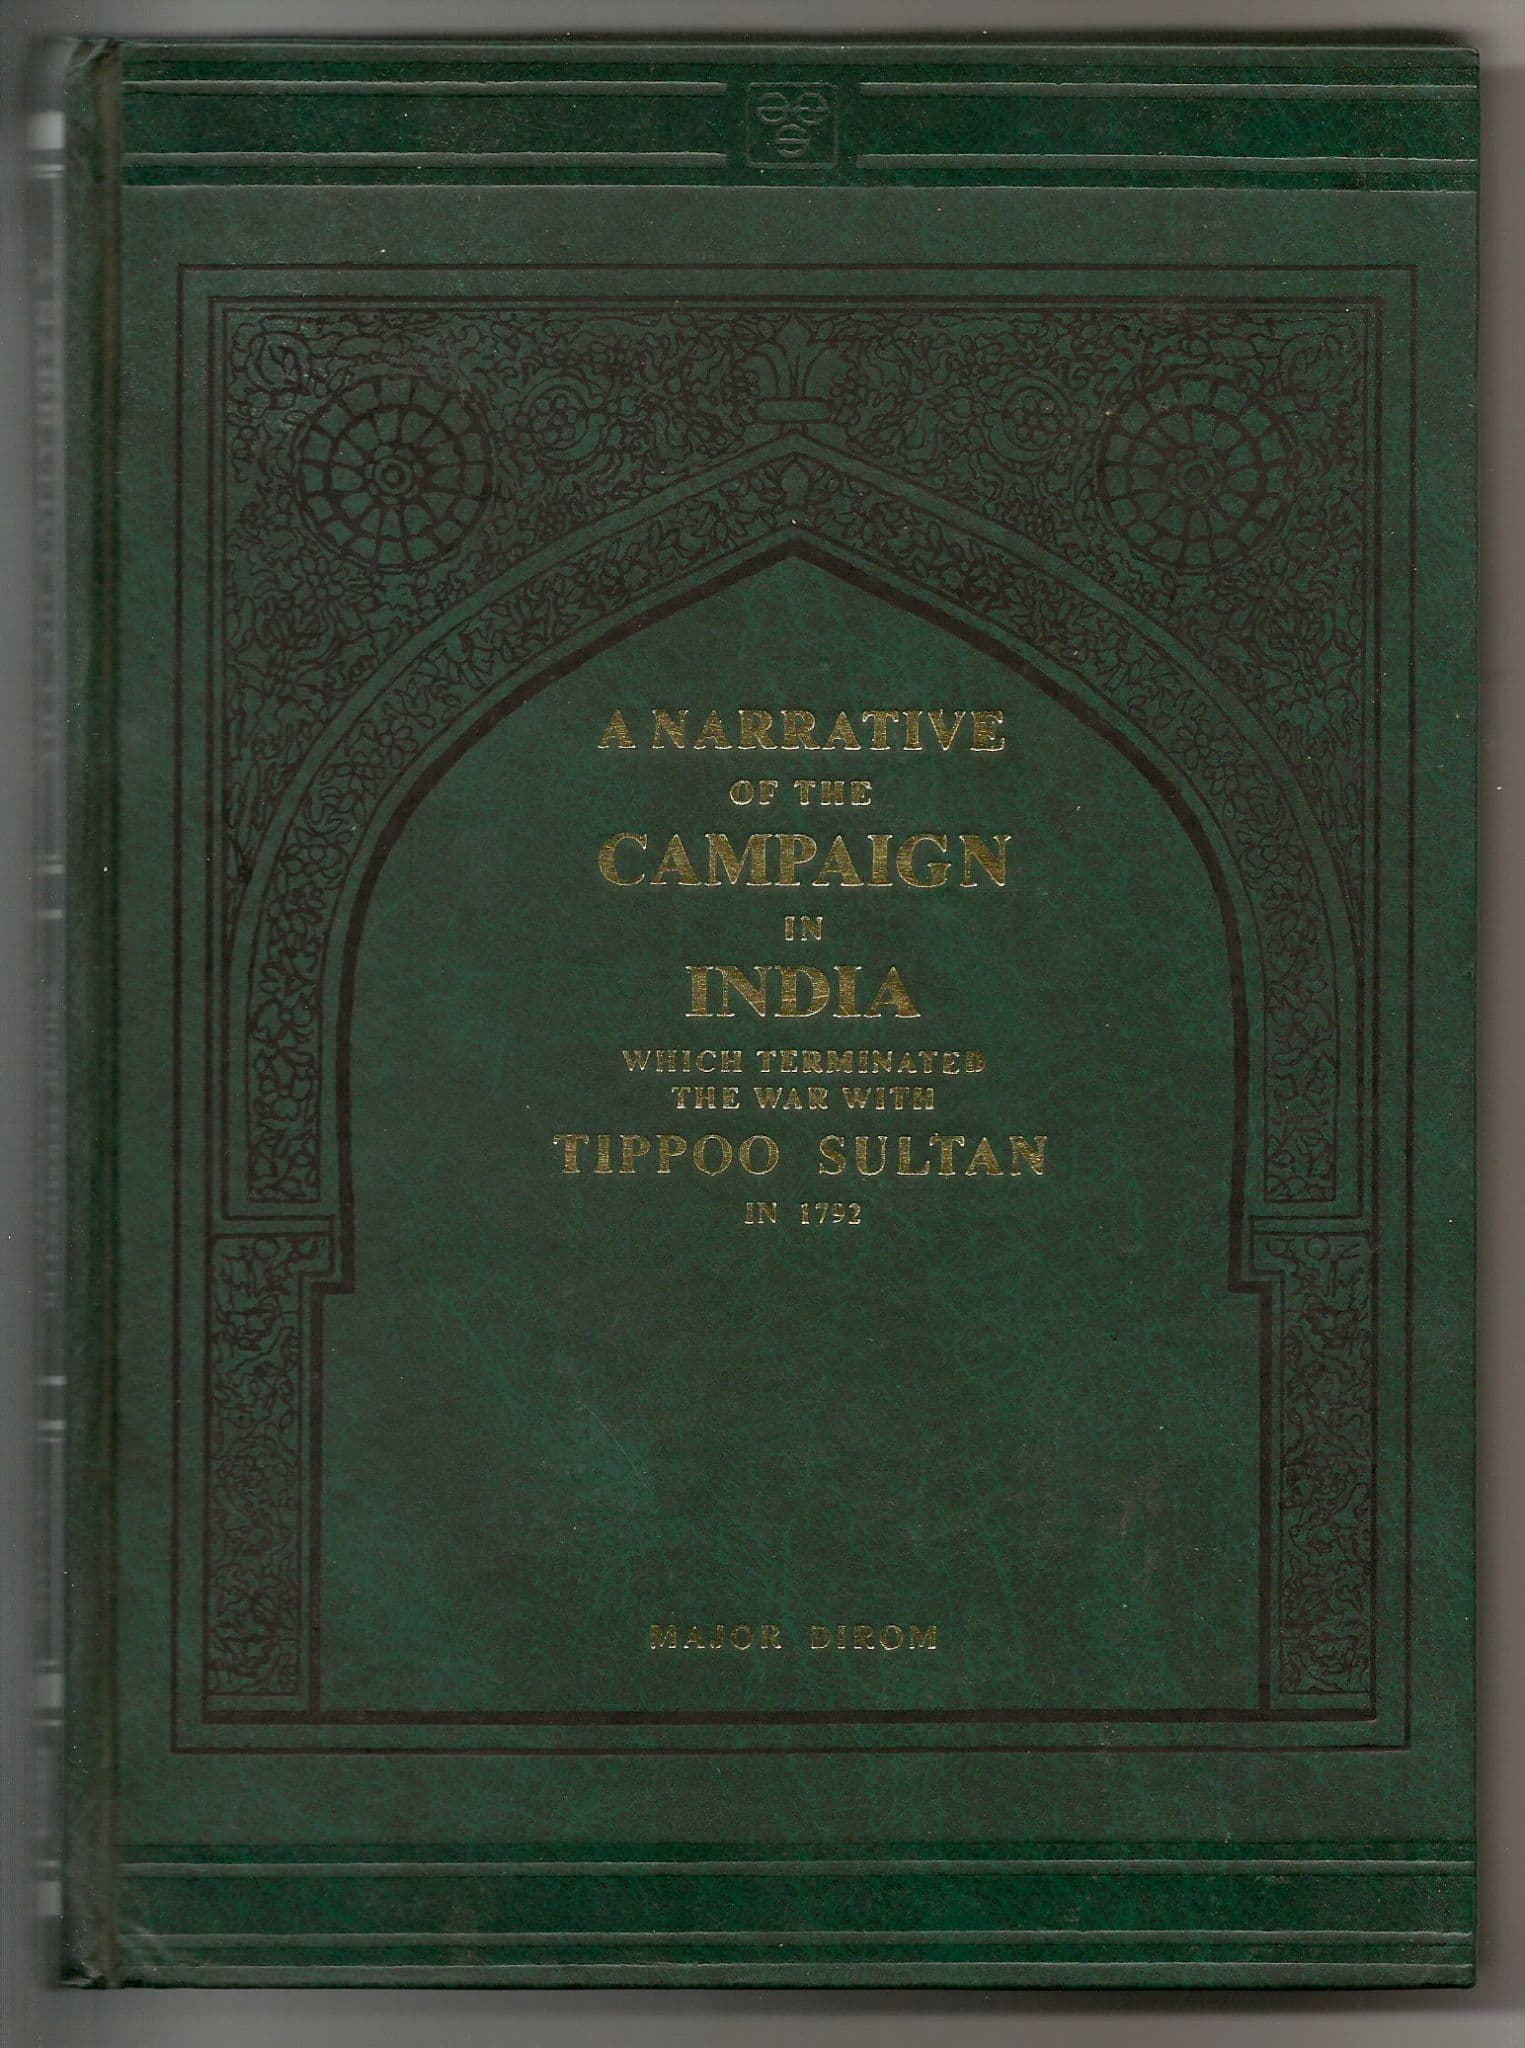 A Narrative of the Campaign in India Which terminated the War with Tippo Sultan in 1792